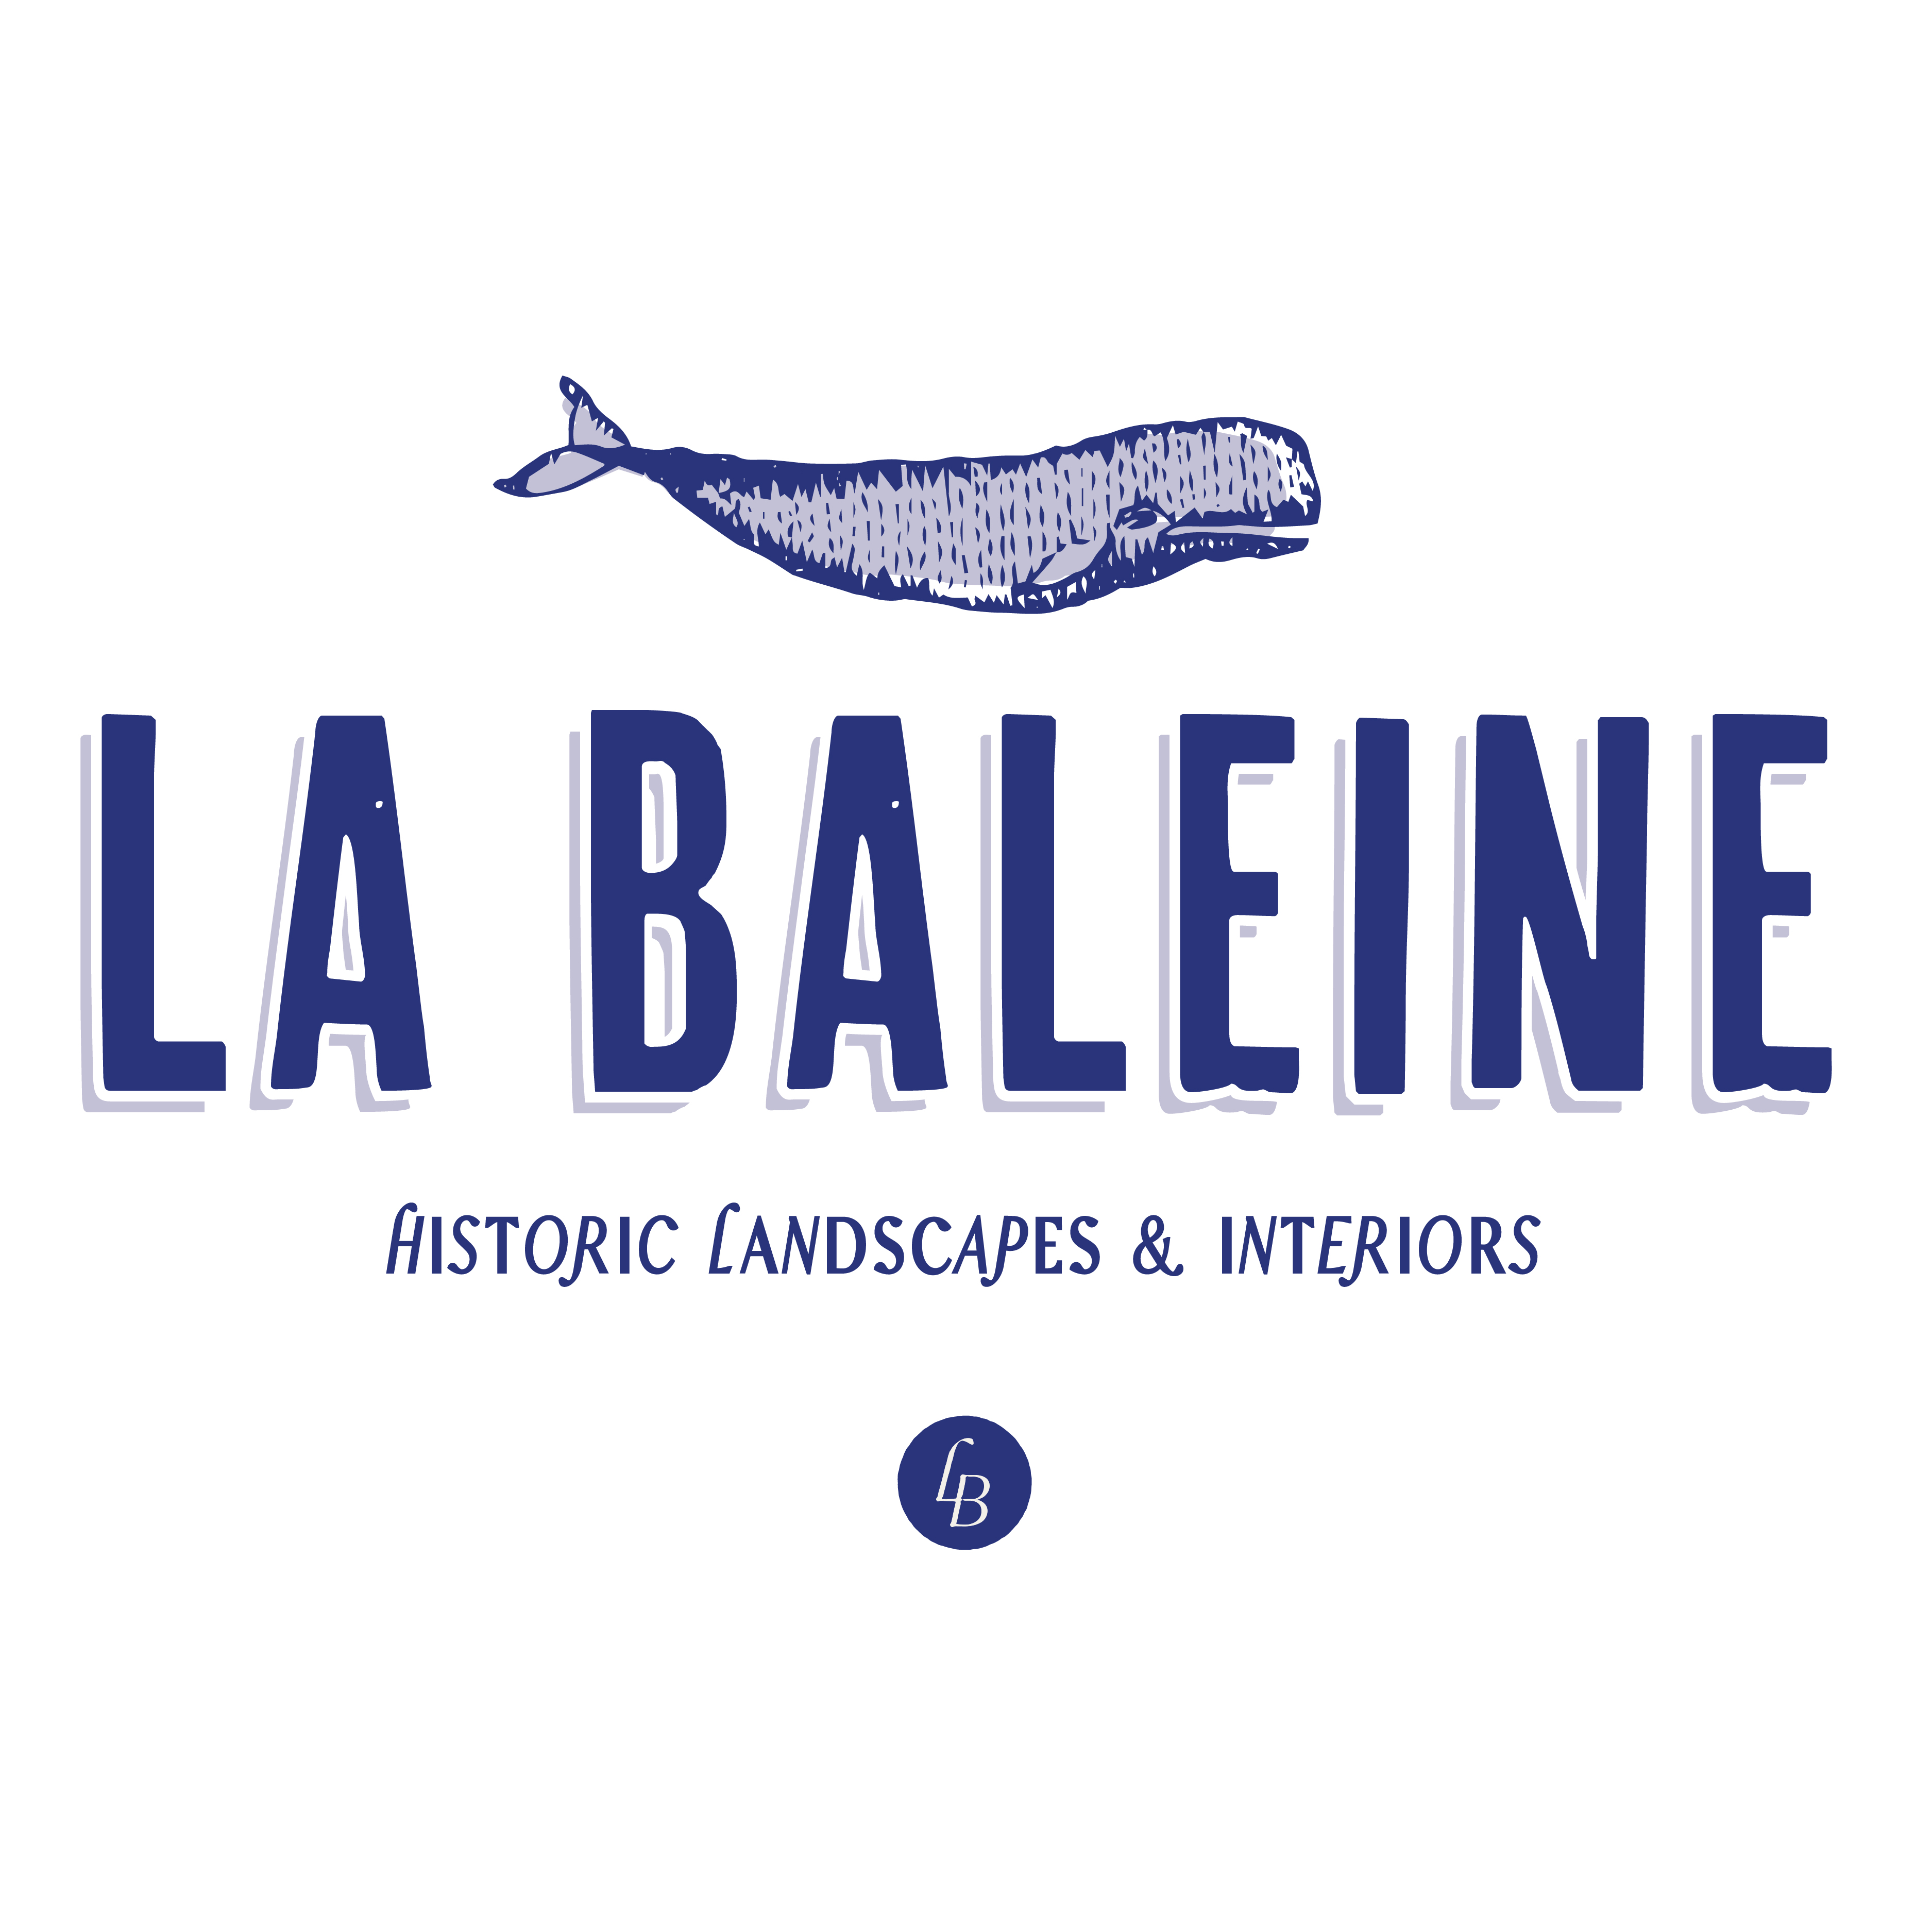 La Baleine logo design by logo designer Caribou Creative for your inspiration and for the worlds largest logo competition